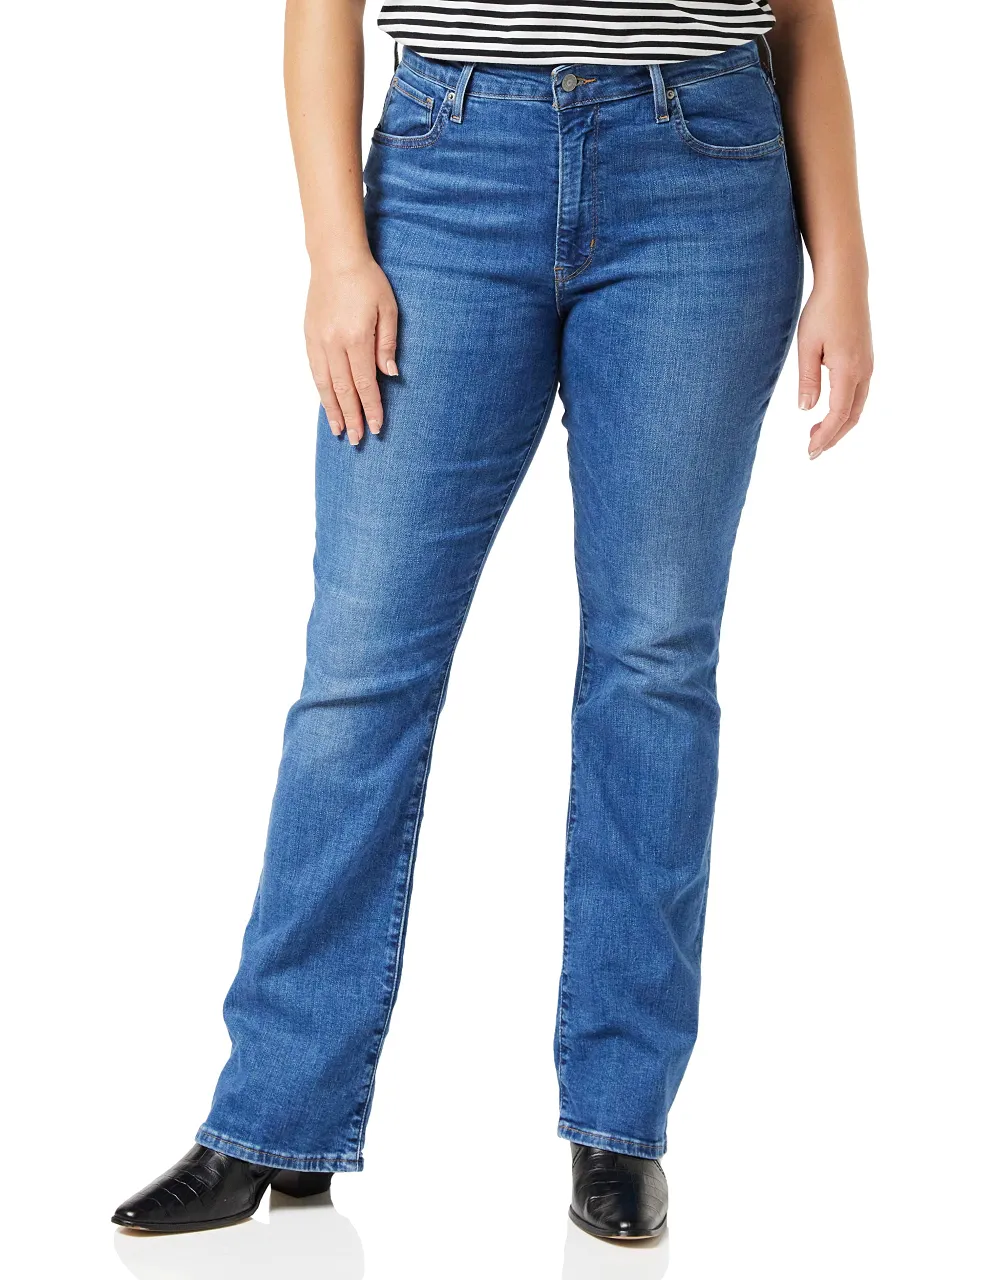 Levi's 725 High Rise Bootcut Women's Jeans